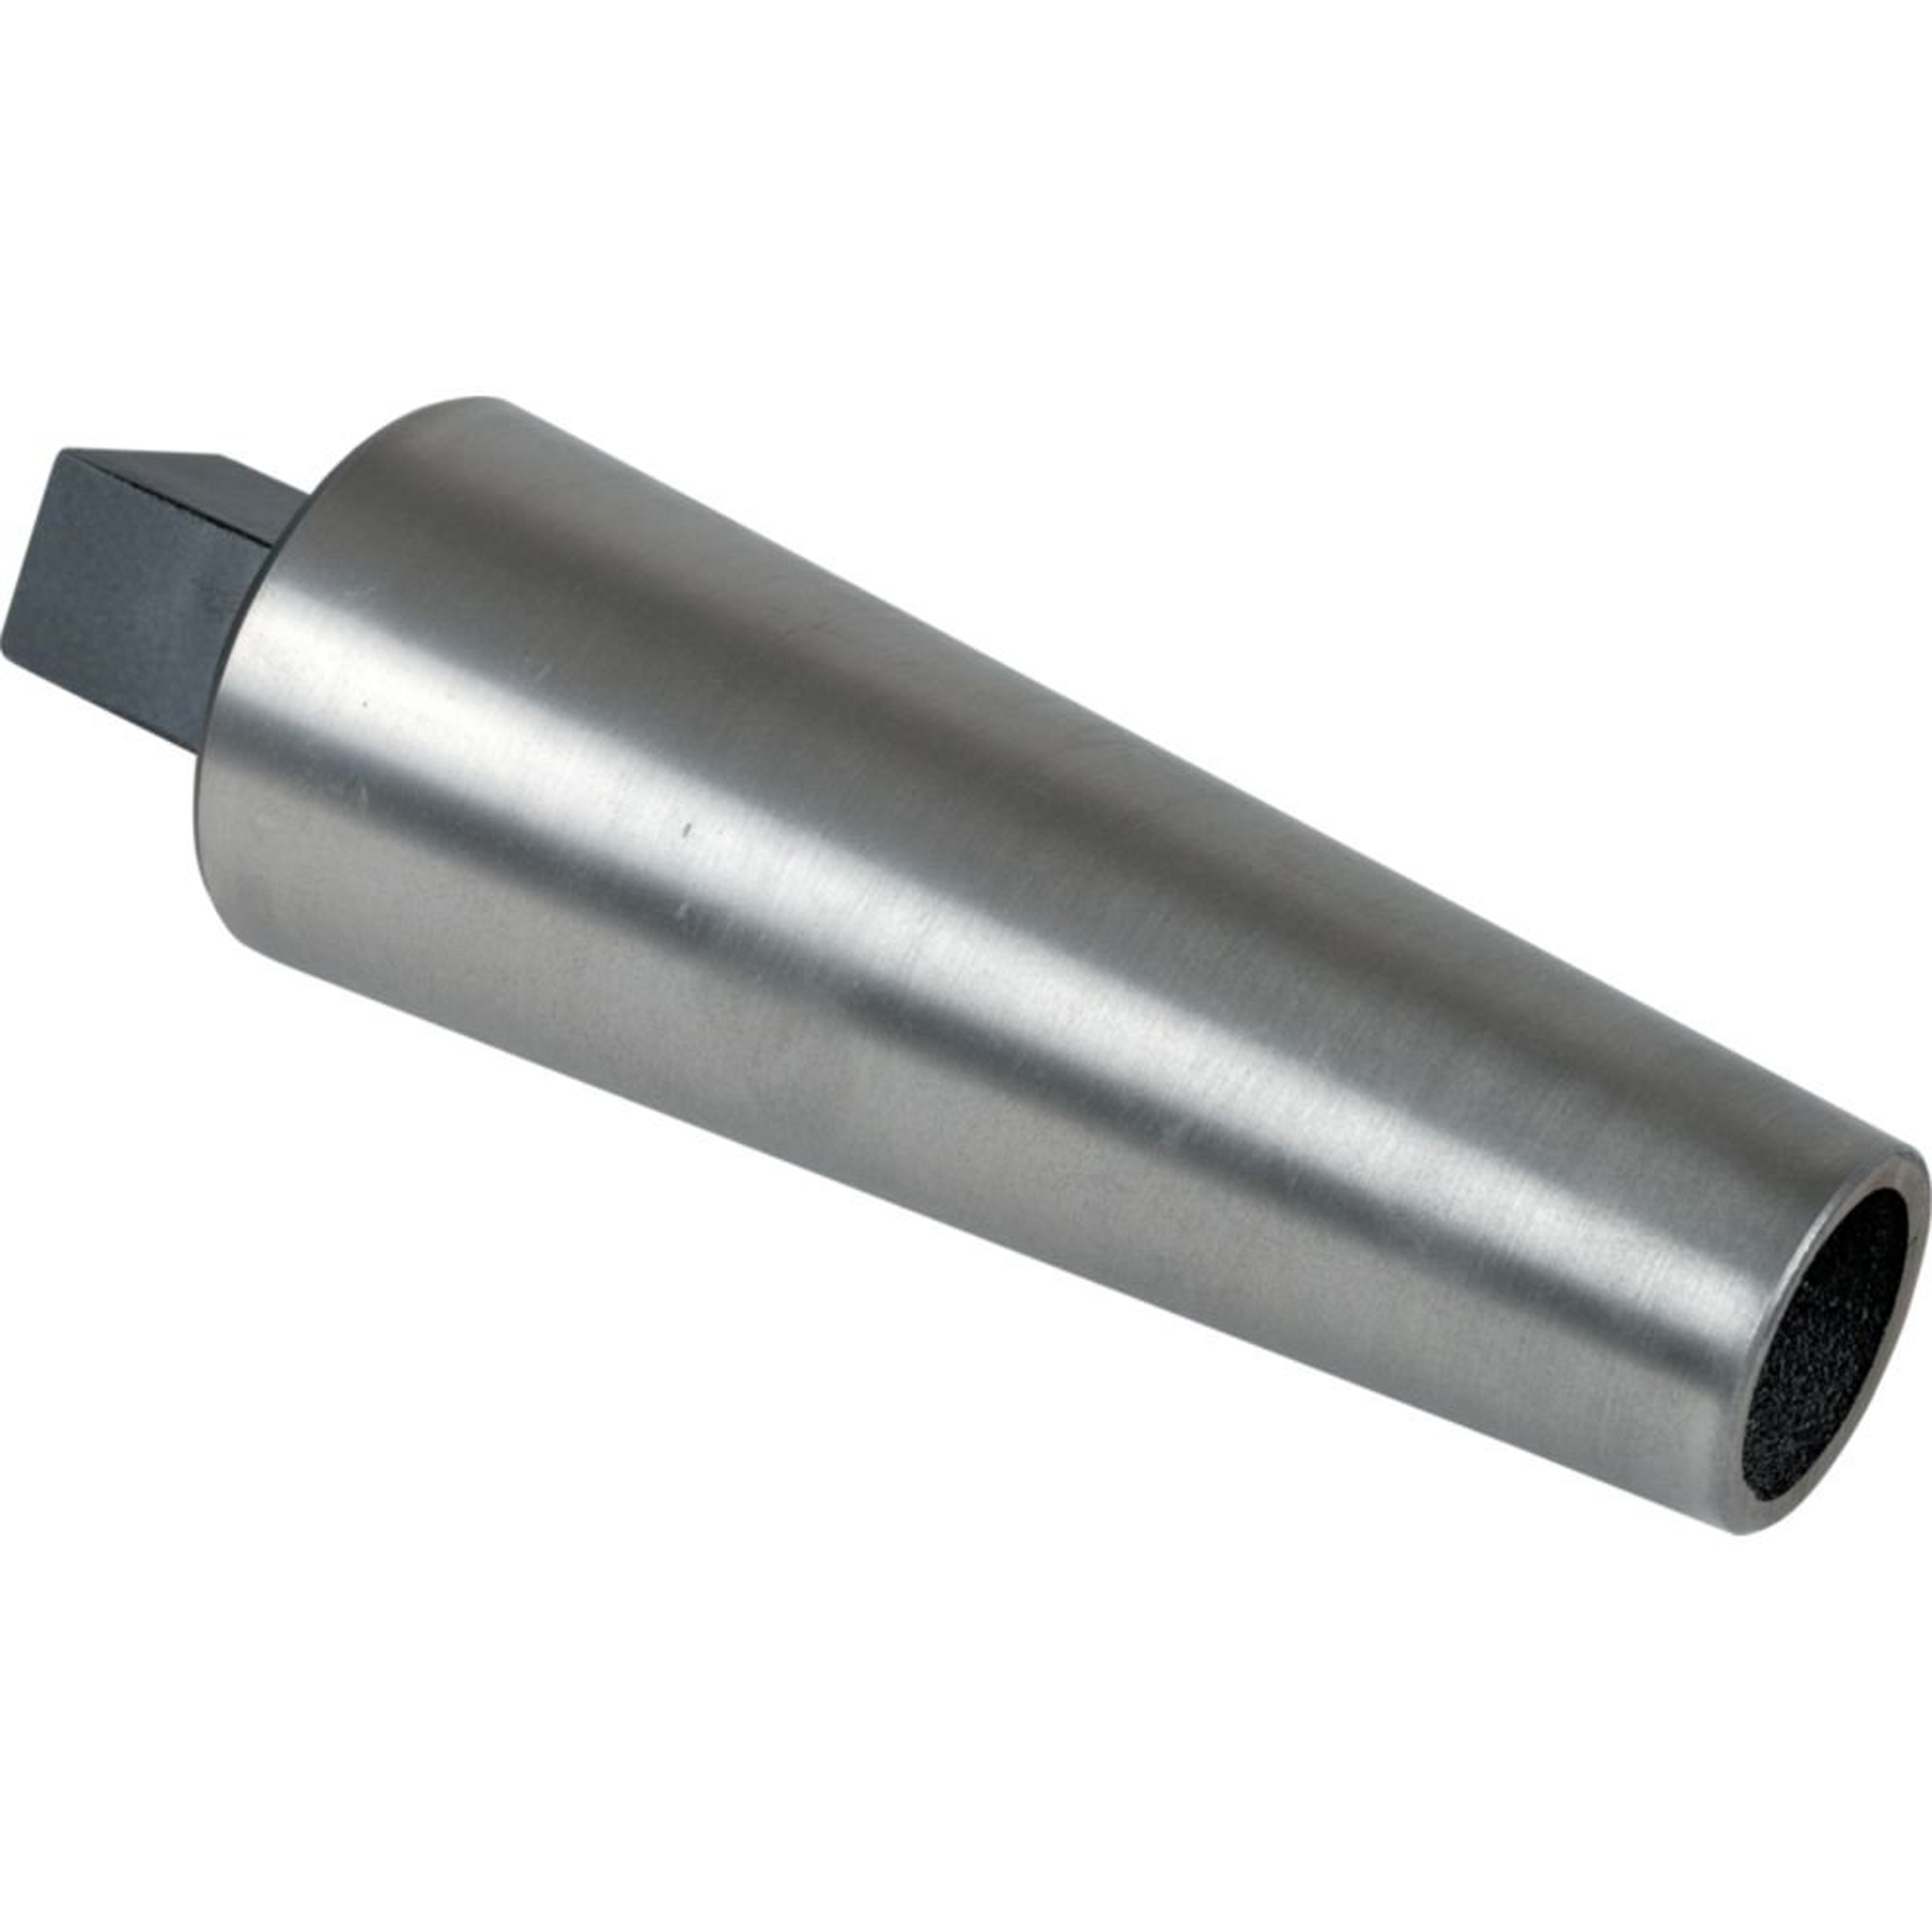 ROUND BRACELET MANDREL with tang - Click Image to Close